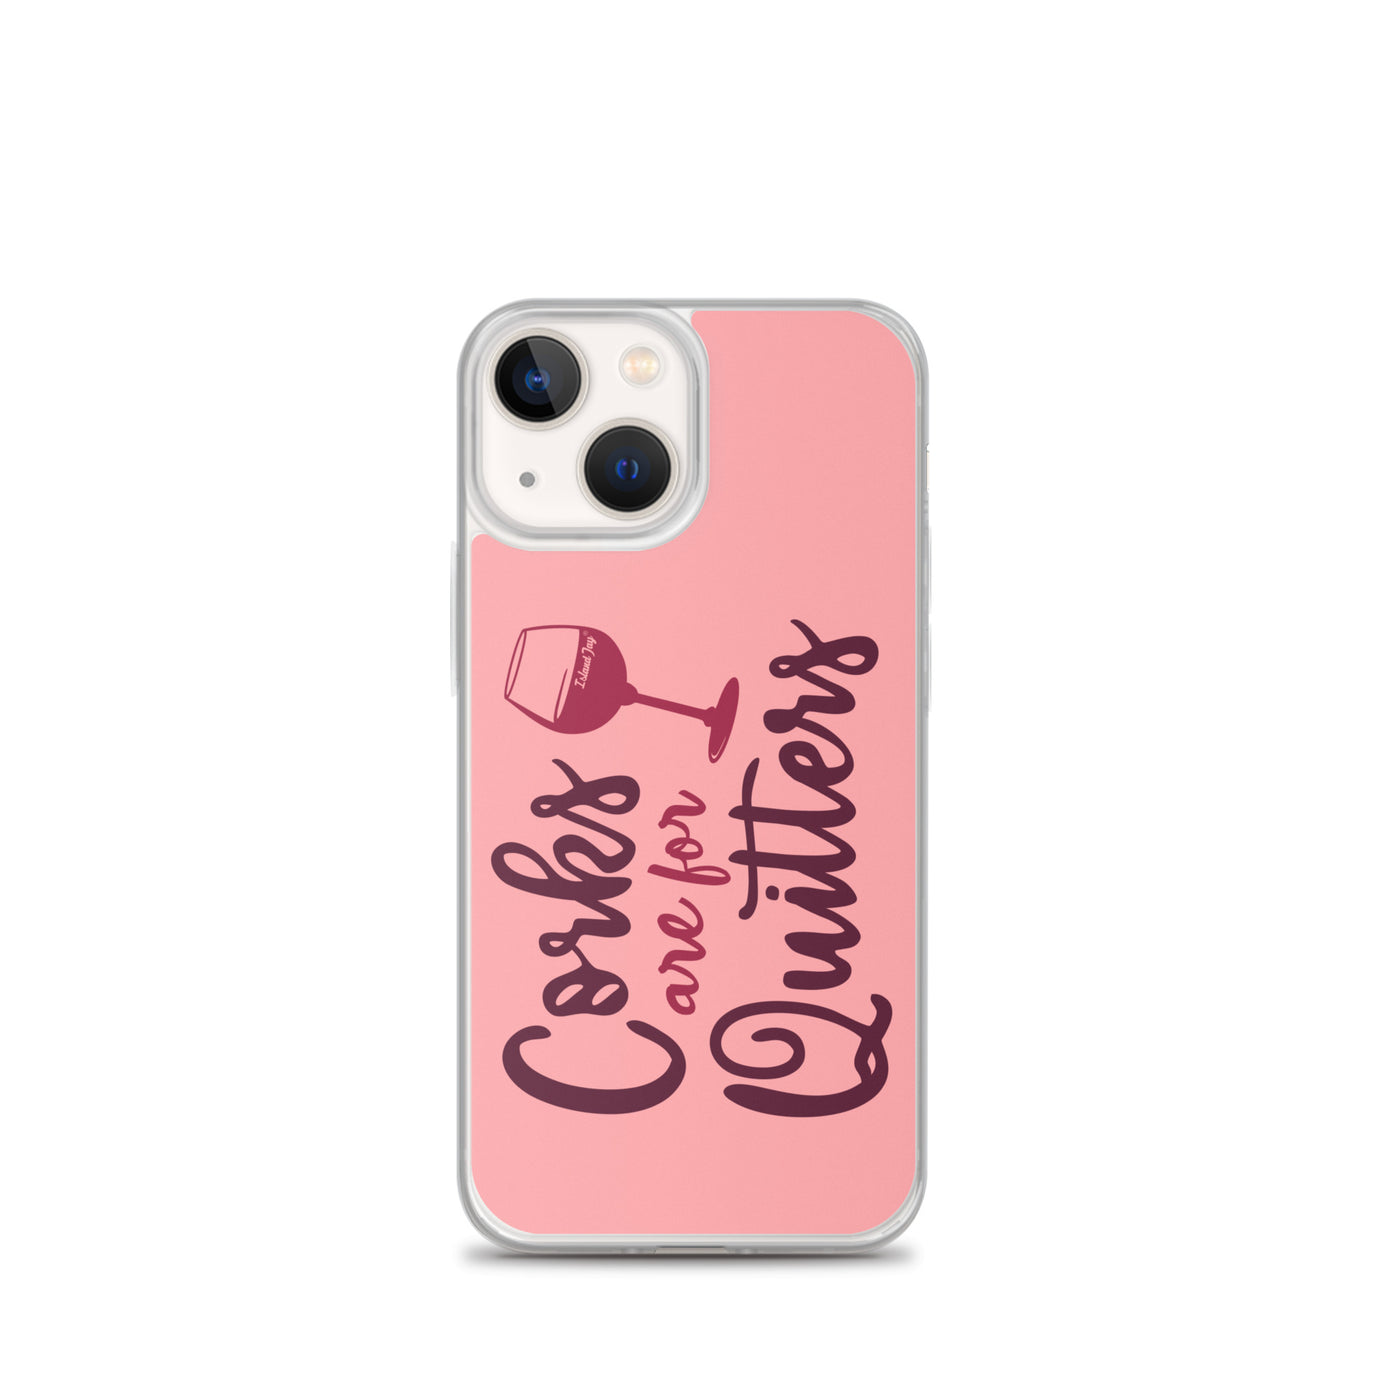 Corks Are For Quitters iPhone Case